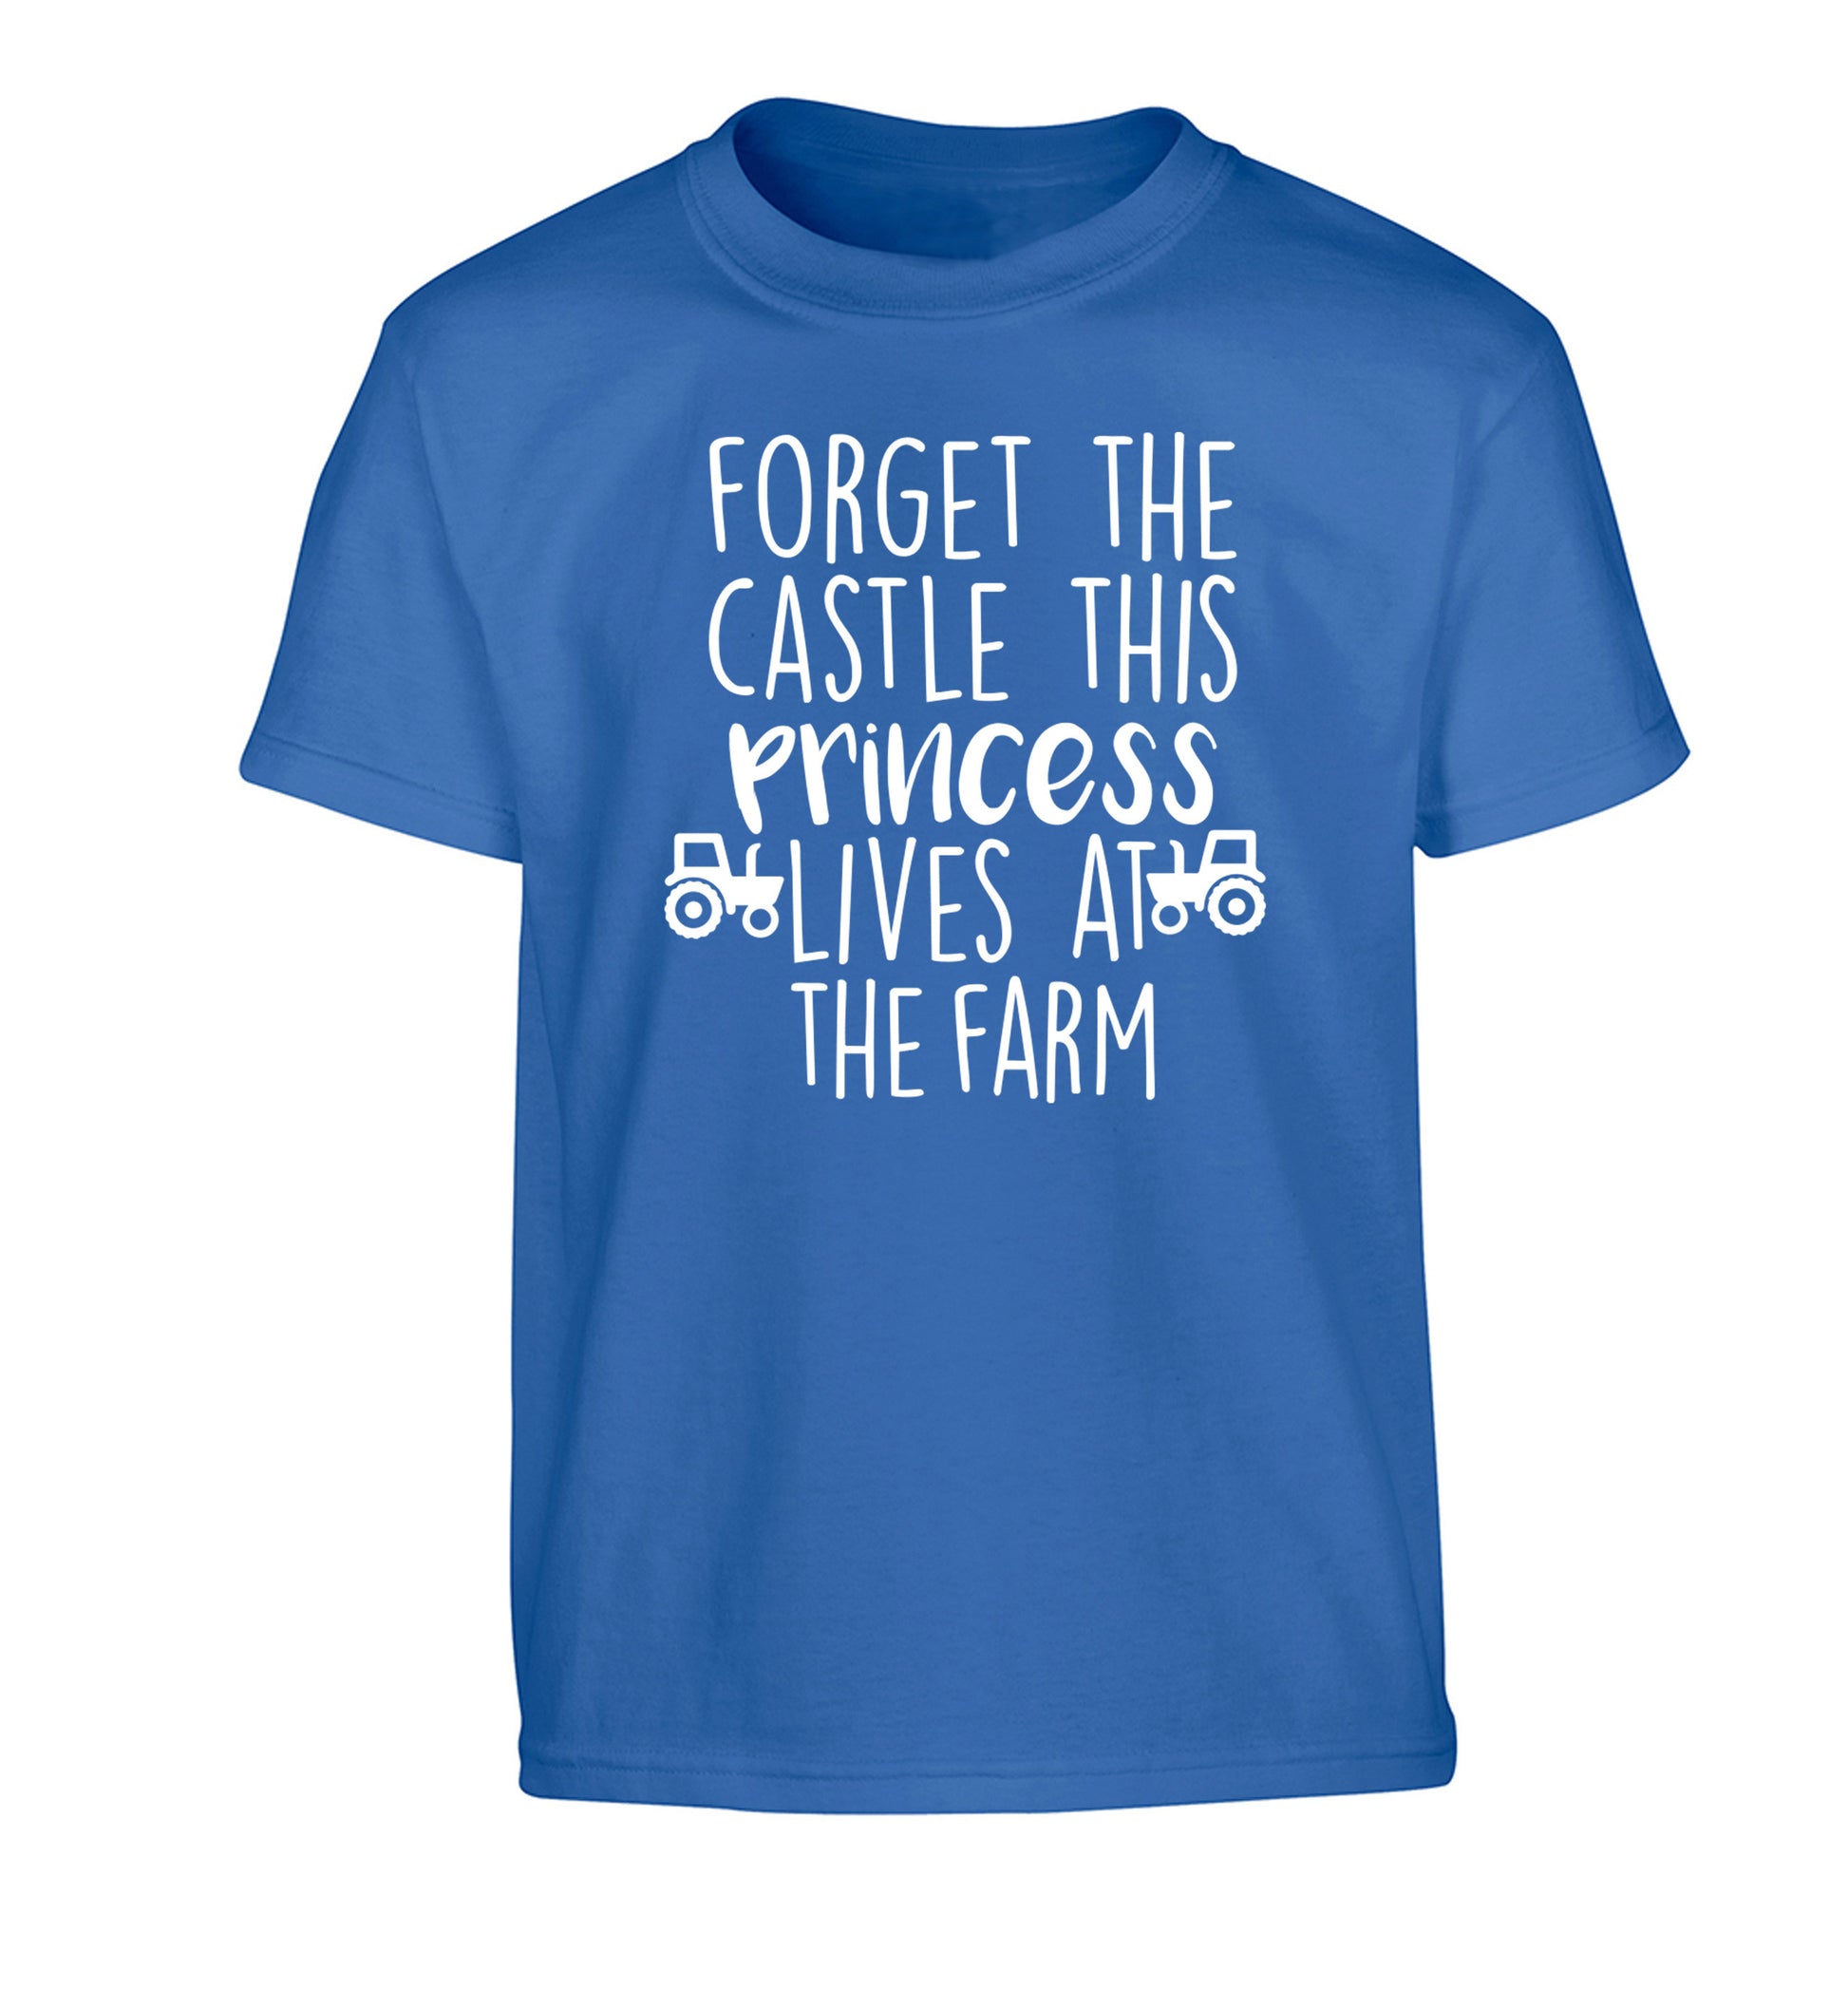 Forget the castle this princess lives at the farm Children's blue Tshirt 12-14 Years